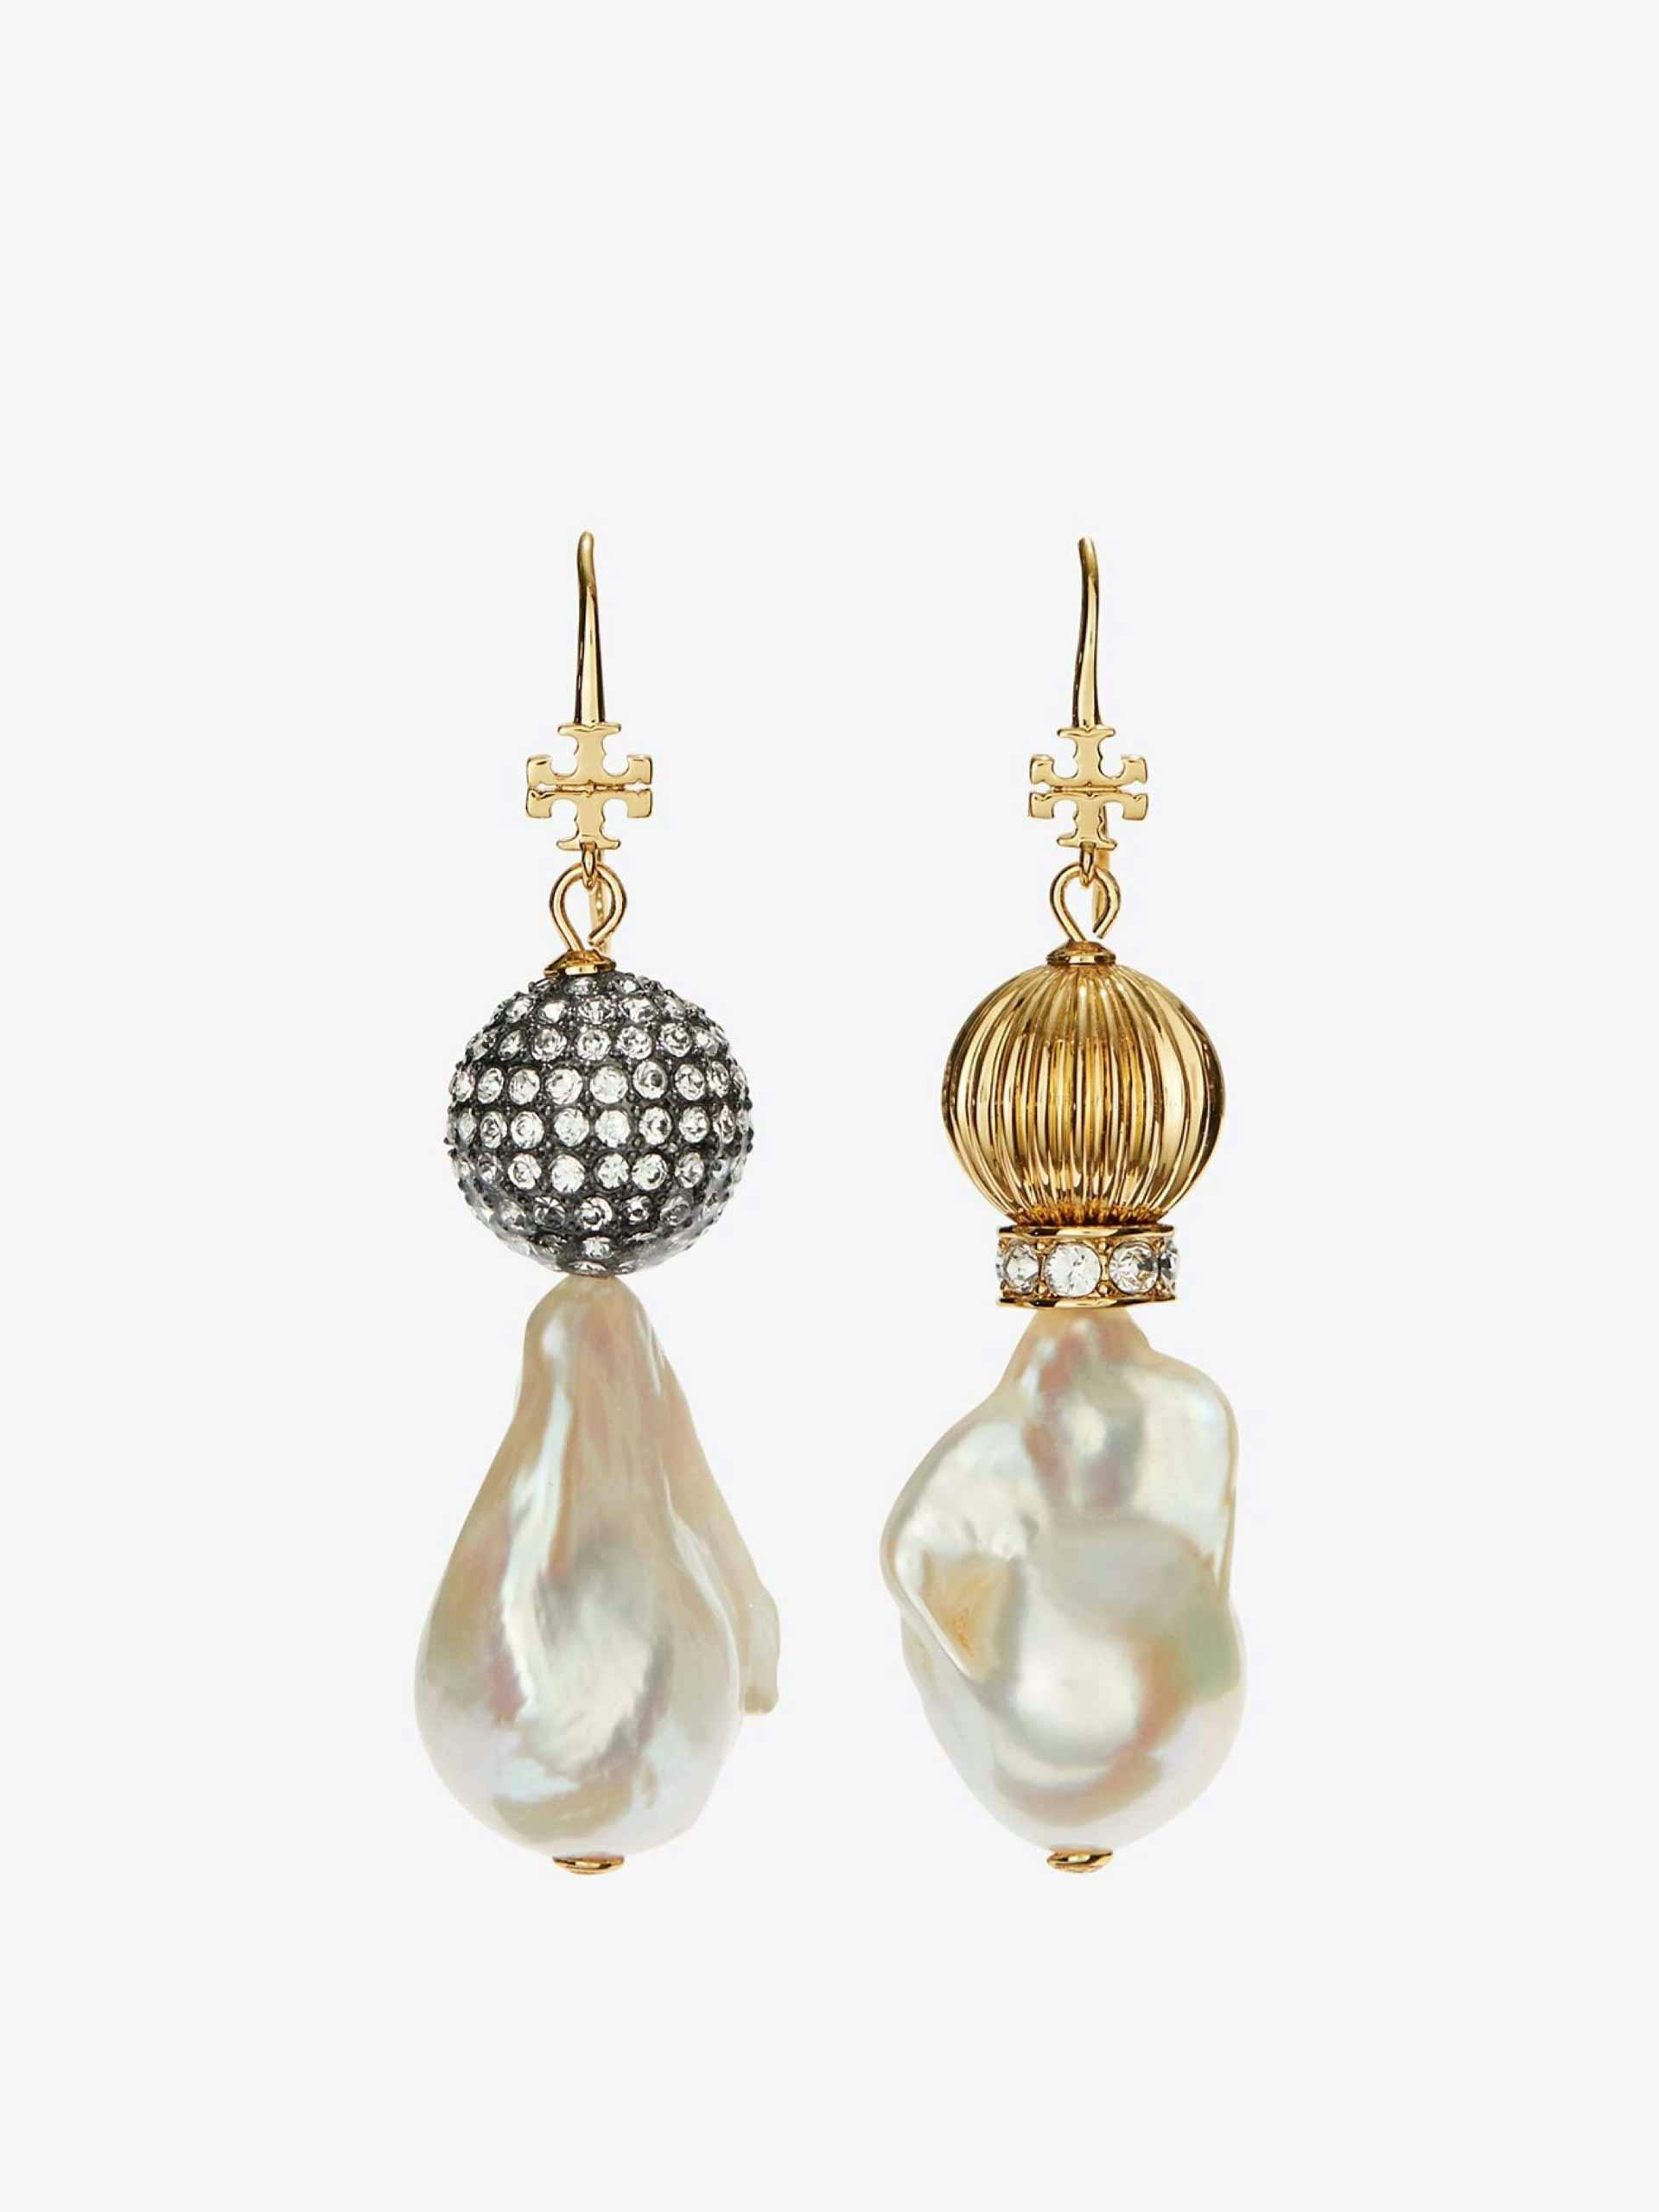 Mismatched earrings with pearls